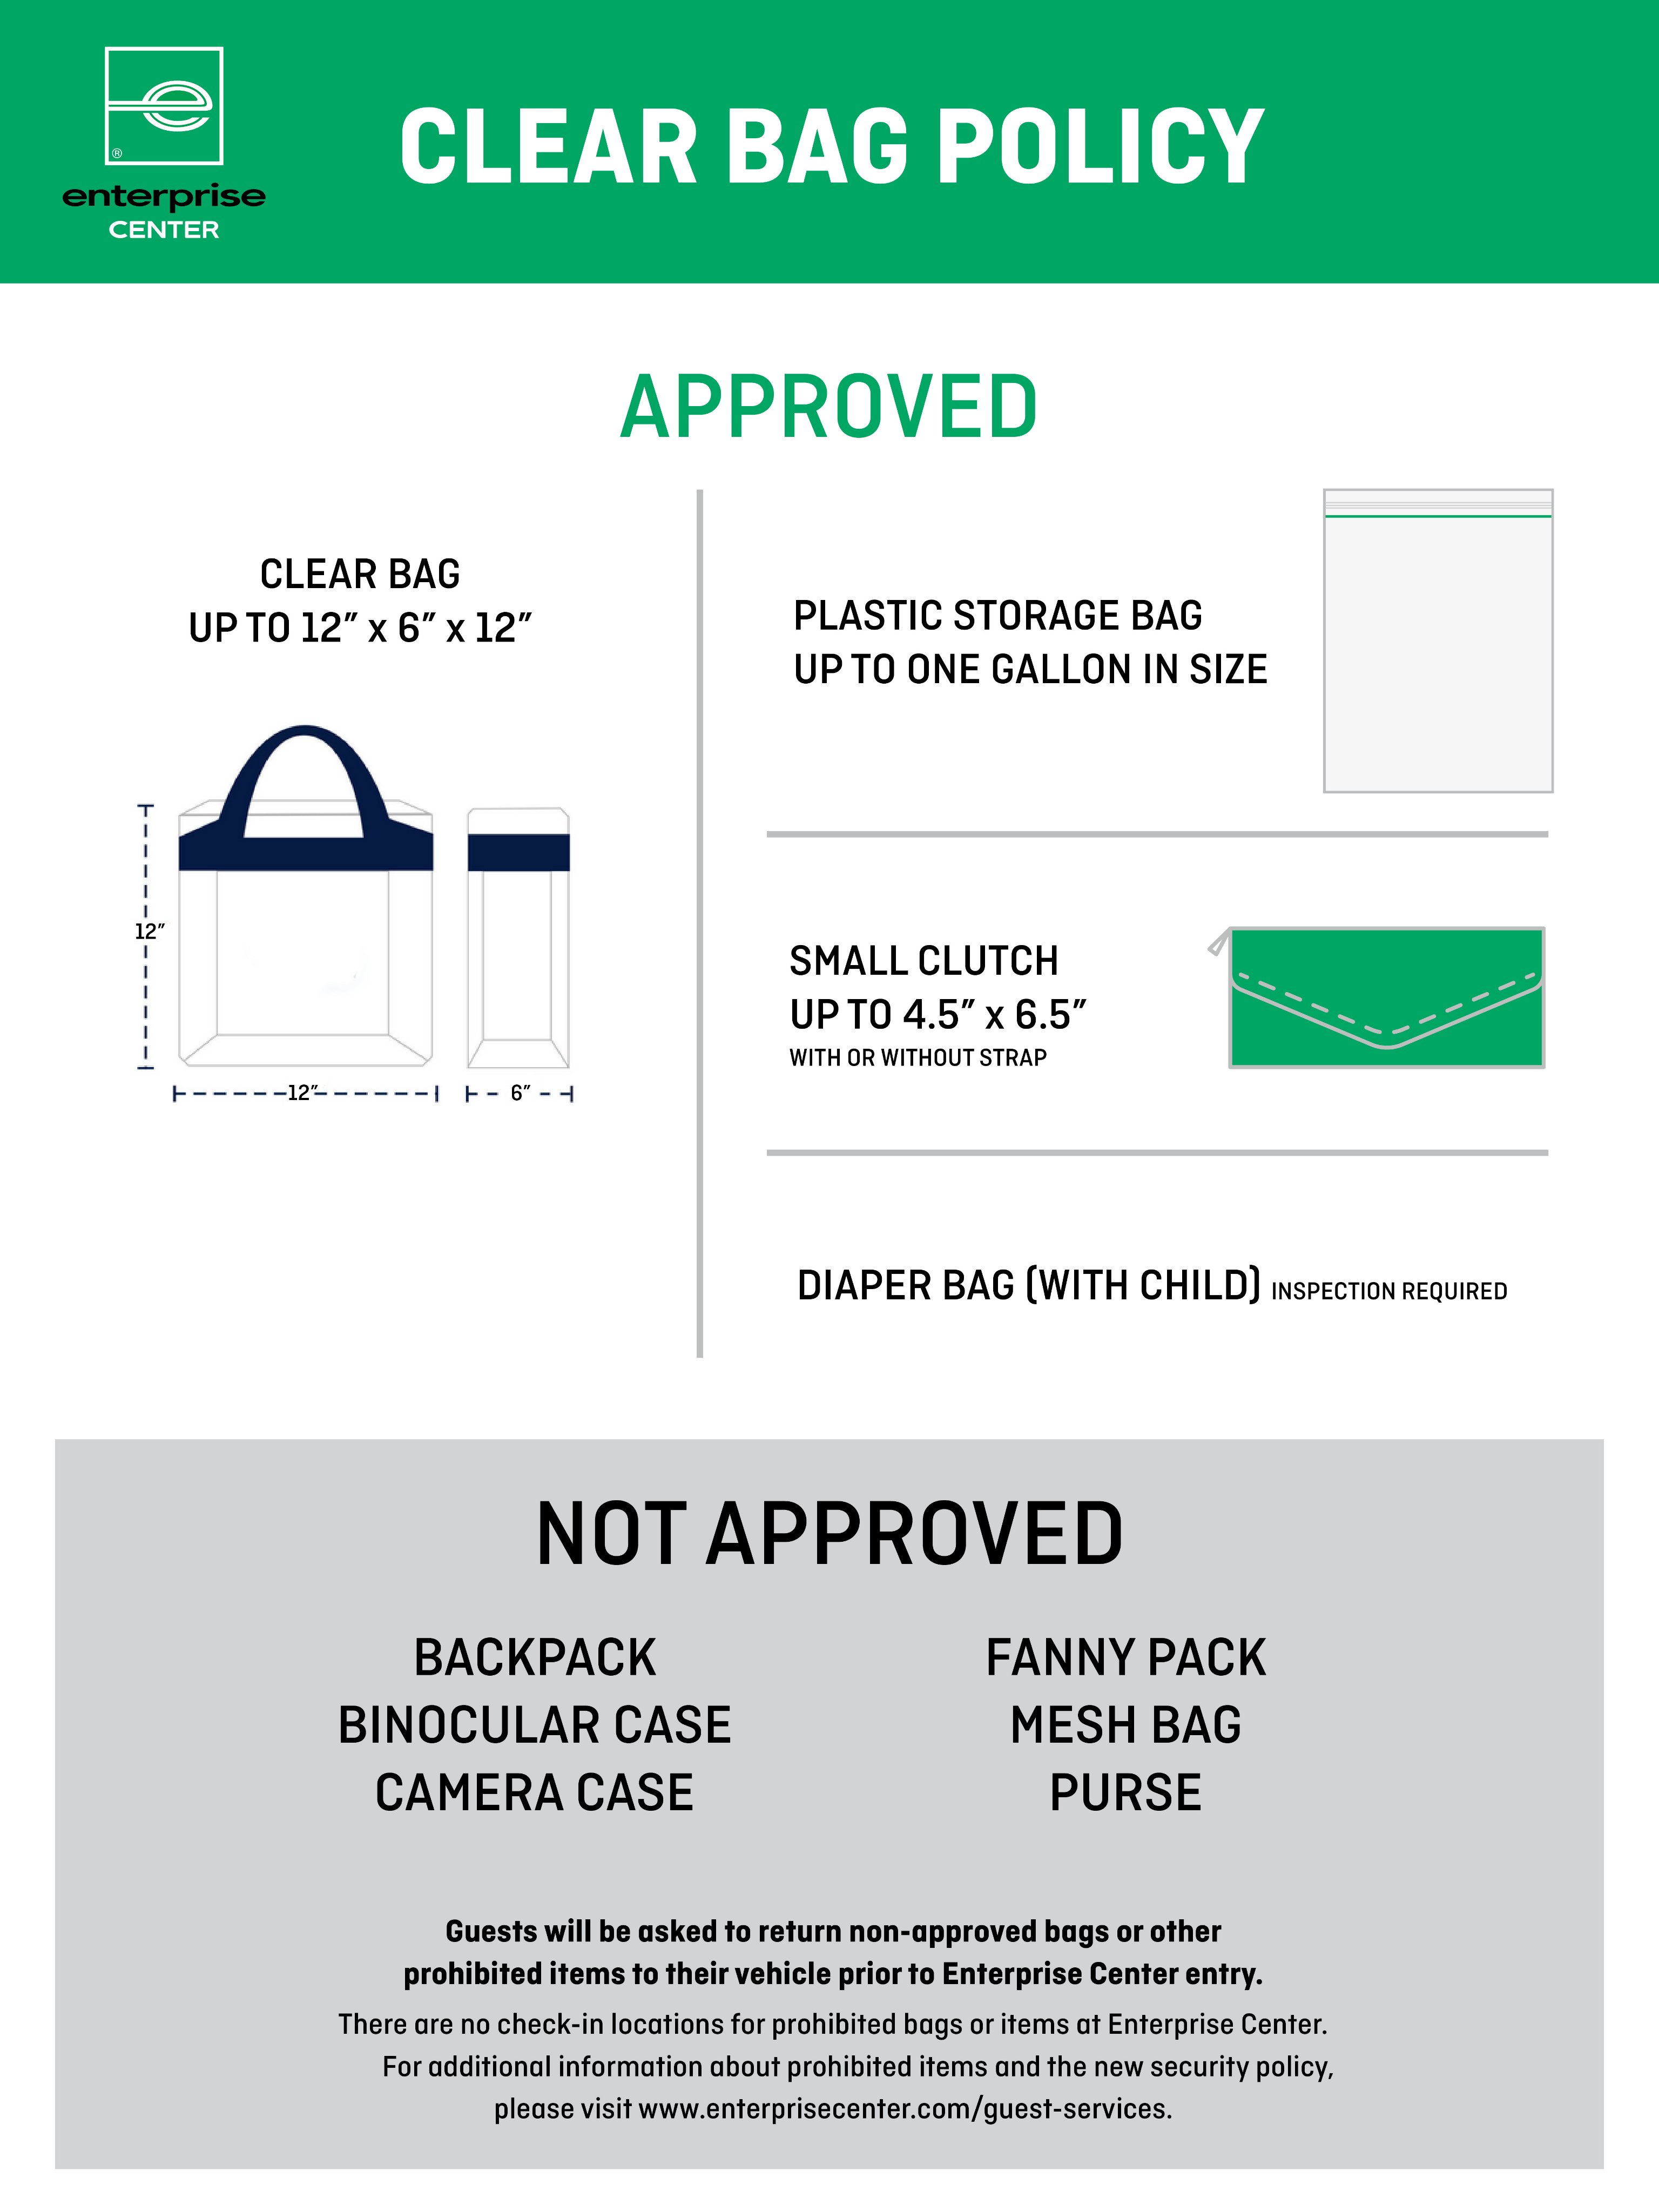 Enterprise Center on X: REMINDER! Our new Clear Bag Policy is in effect  tonight for John Mayer's concert. Please see the graphic below or visit:   #STL  / X